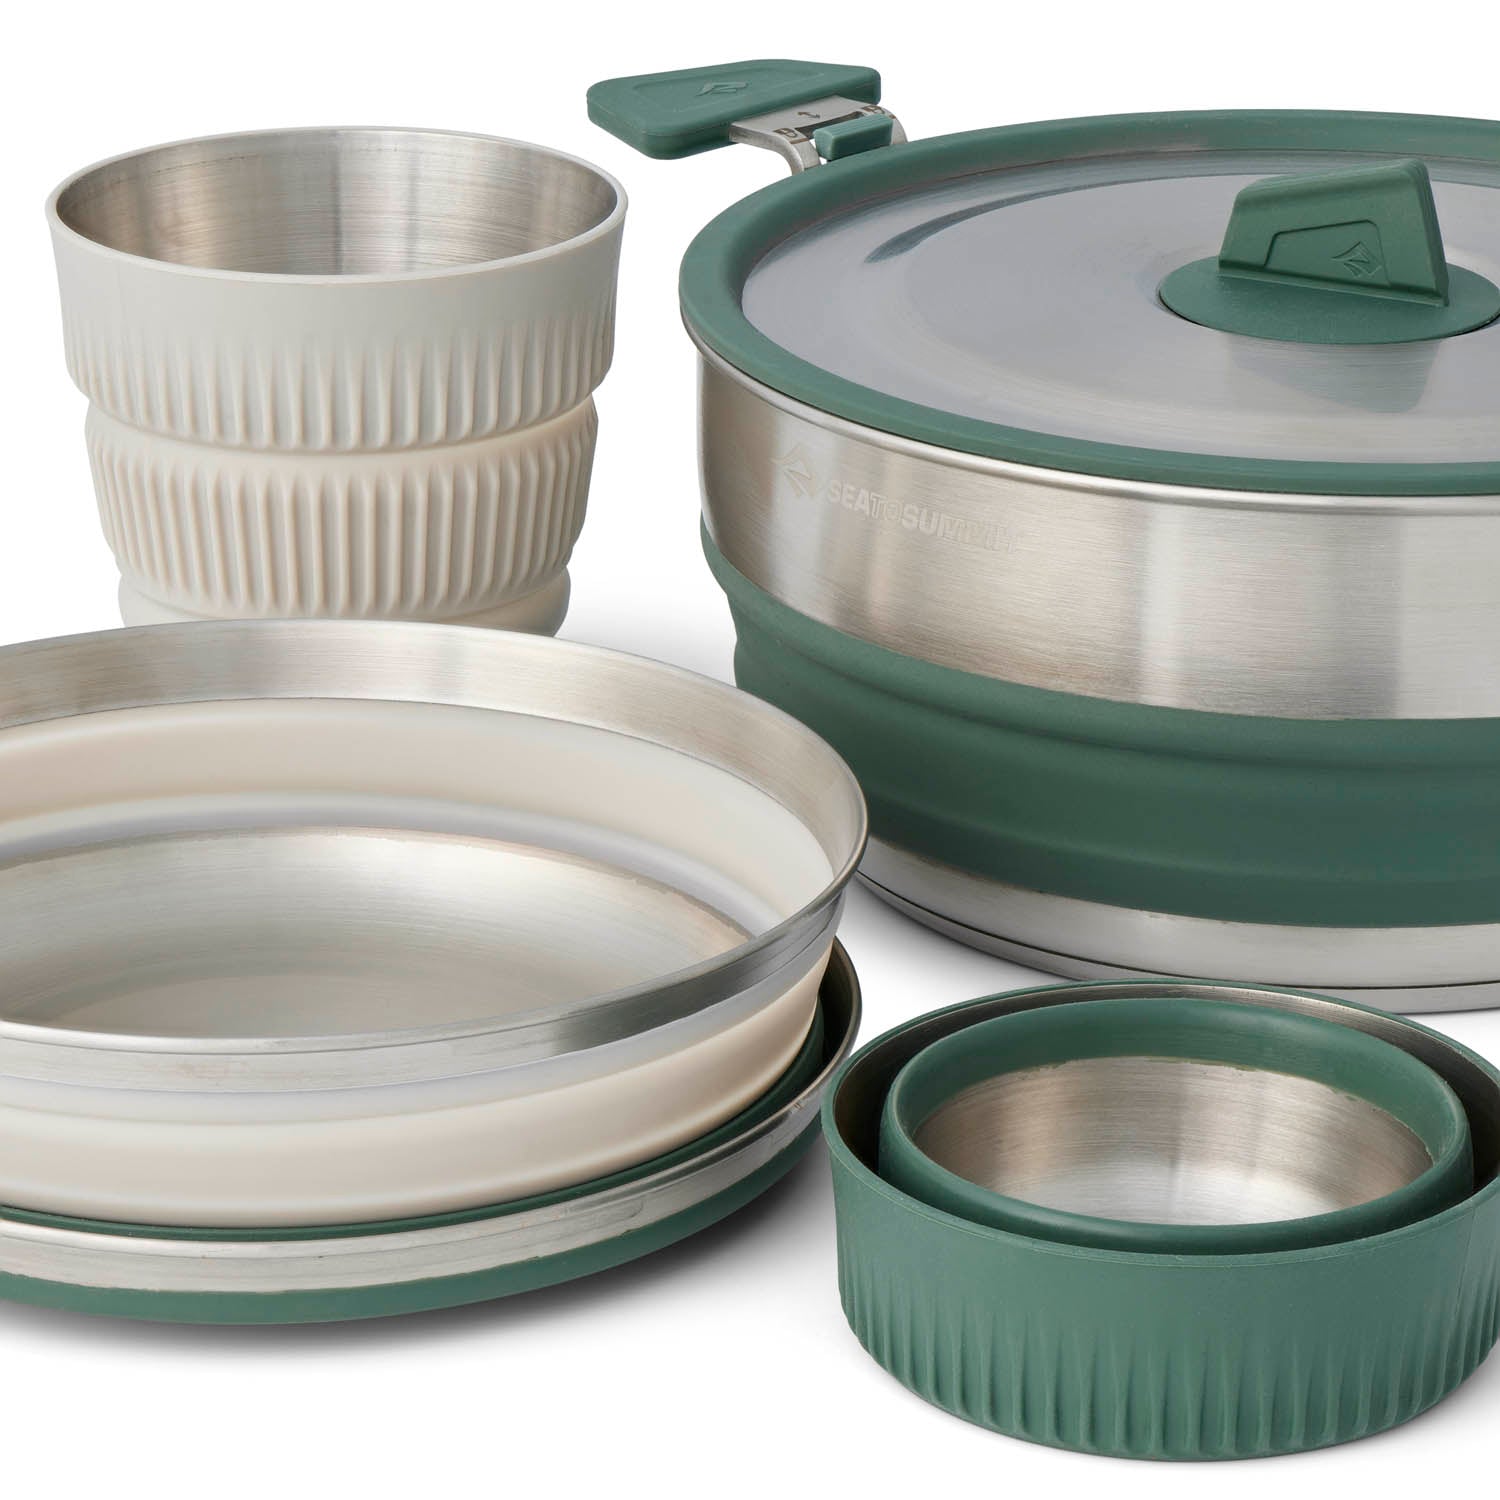 Detour Stainless Steel One Pot Cook Set - [5 Piece]